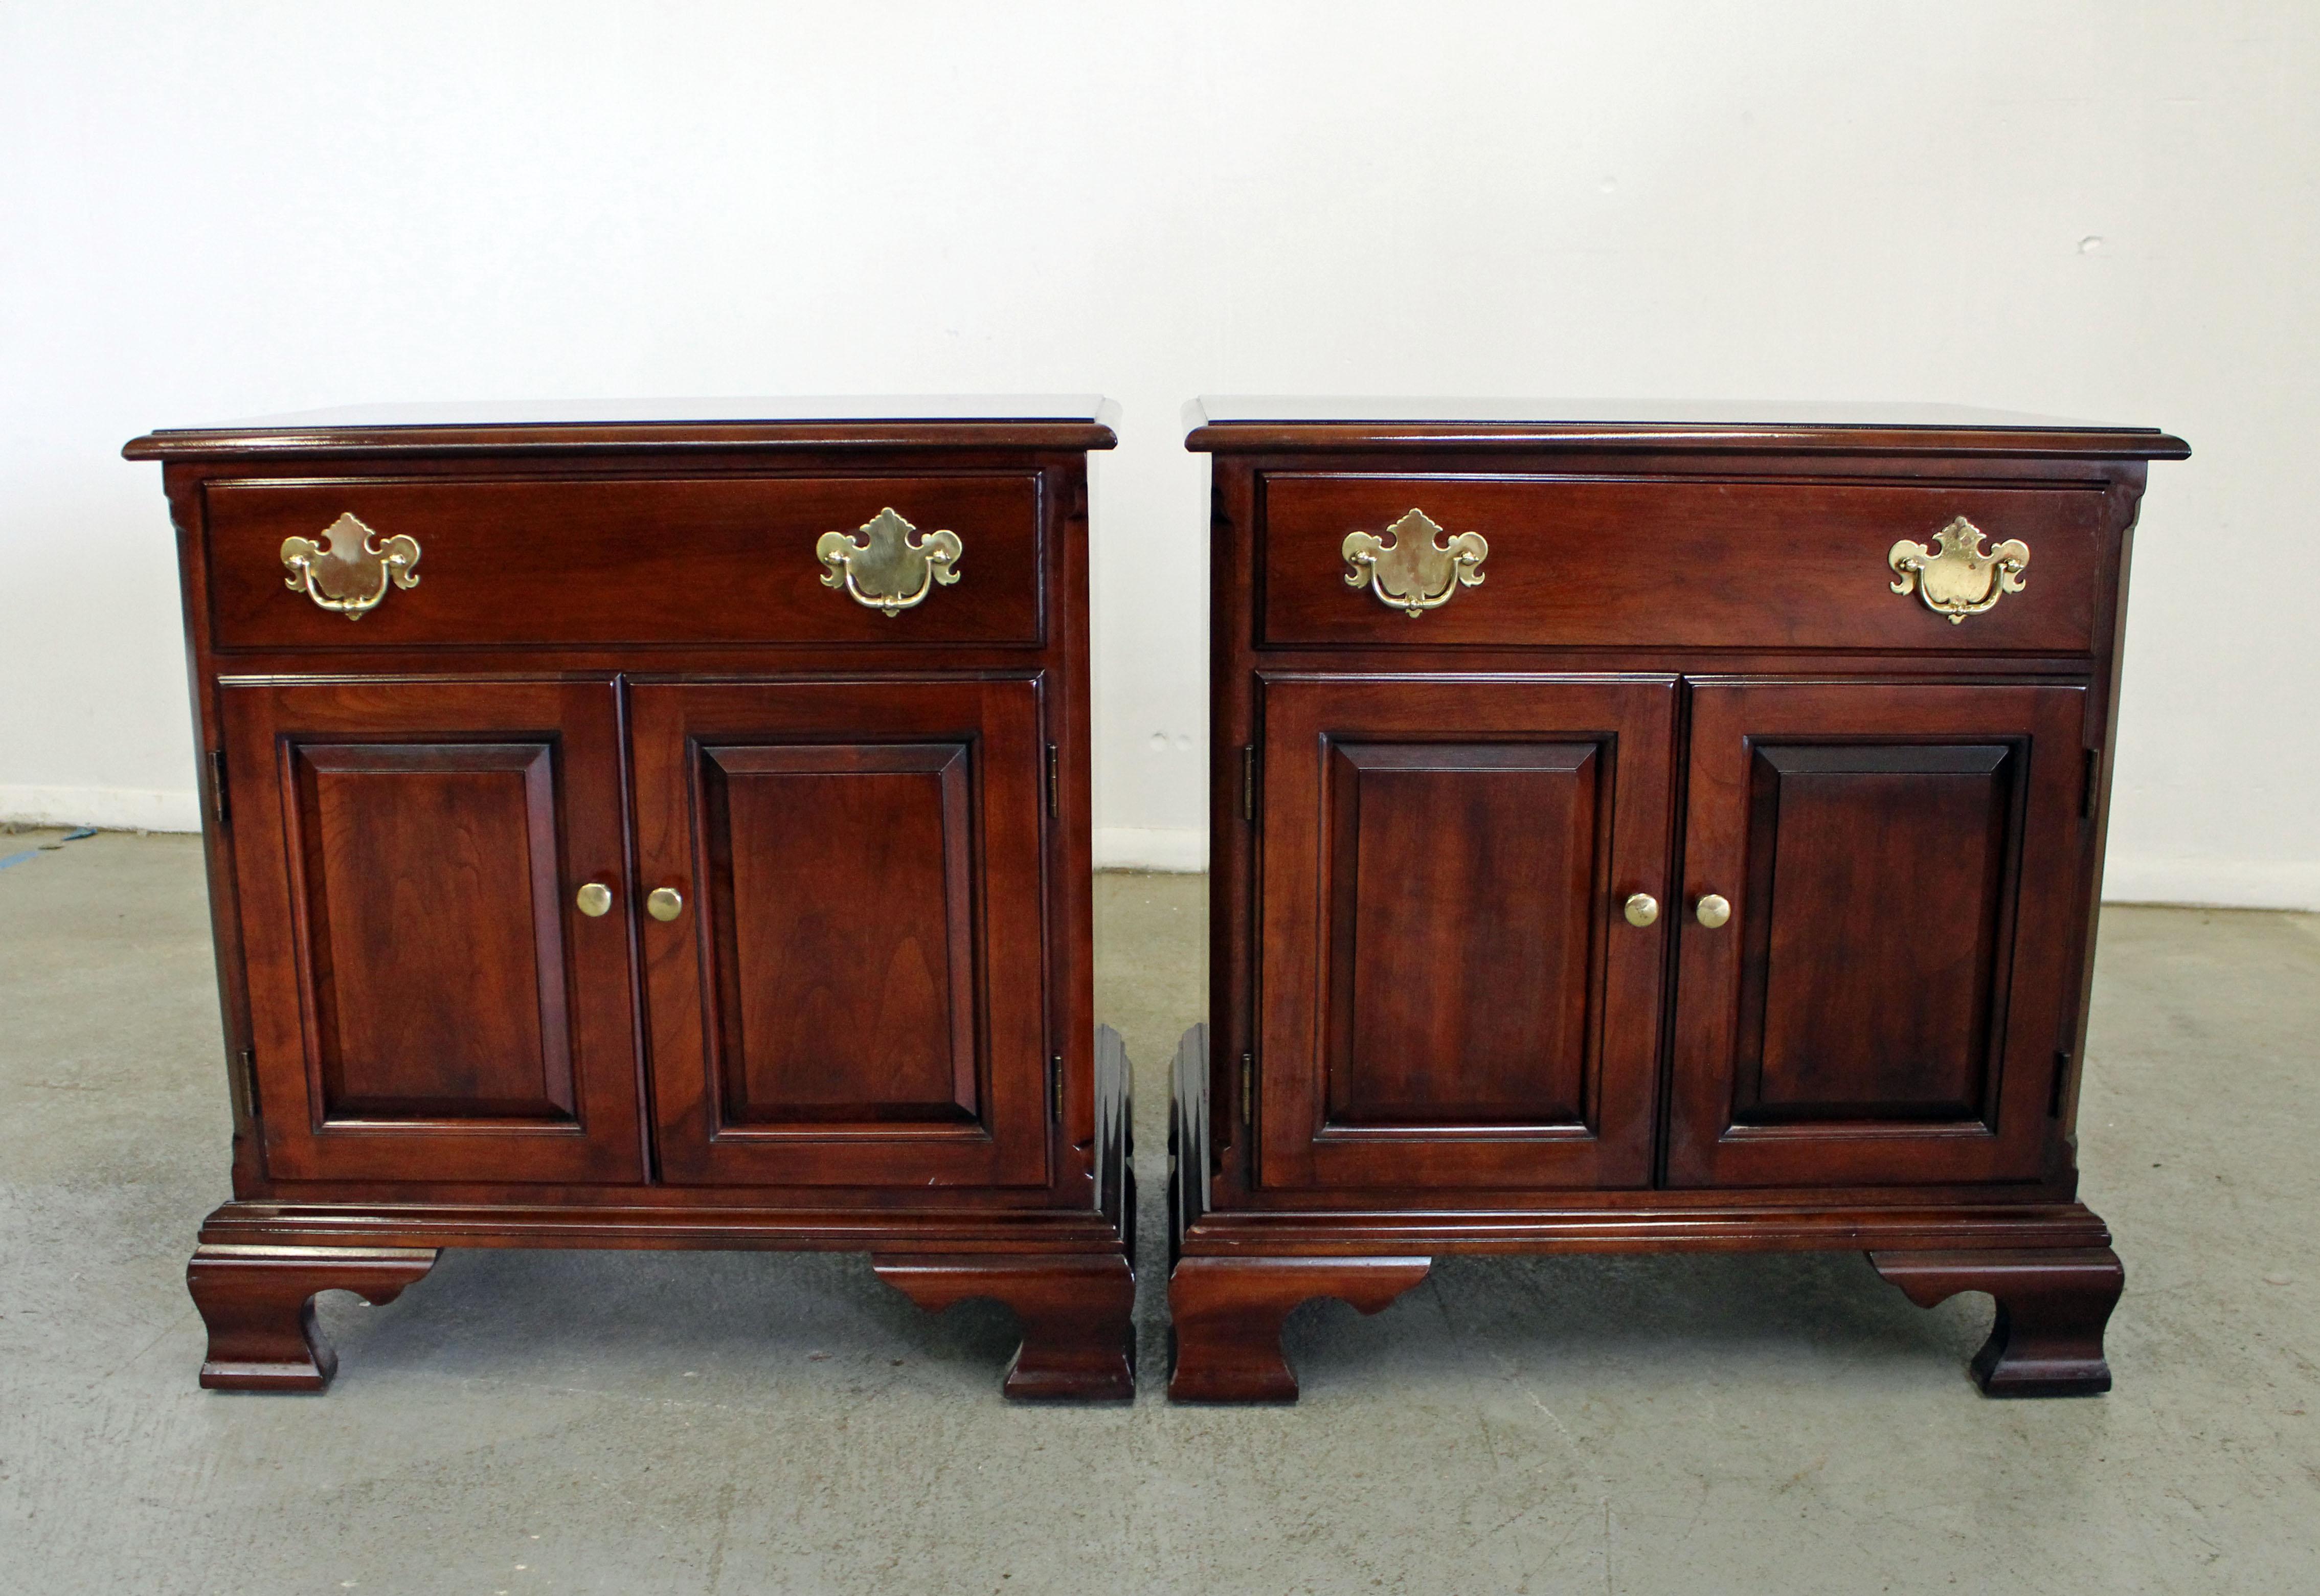 Offered is a pair of vintage Chippendale cherry nightstands featuring two doors with shelving and one dove-tailed drawer. Made by Statton Old Towne. They are in good condition, with some signs of age wear (wear on pulls, surface scratches or